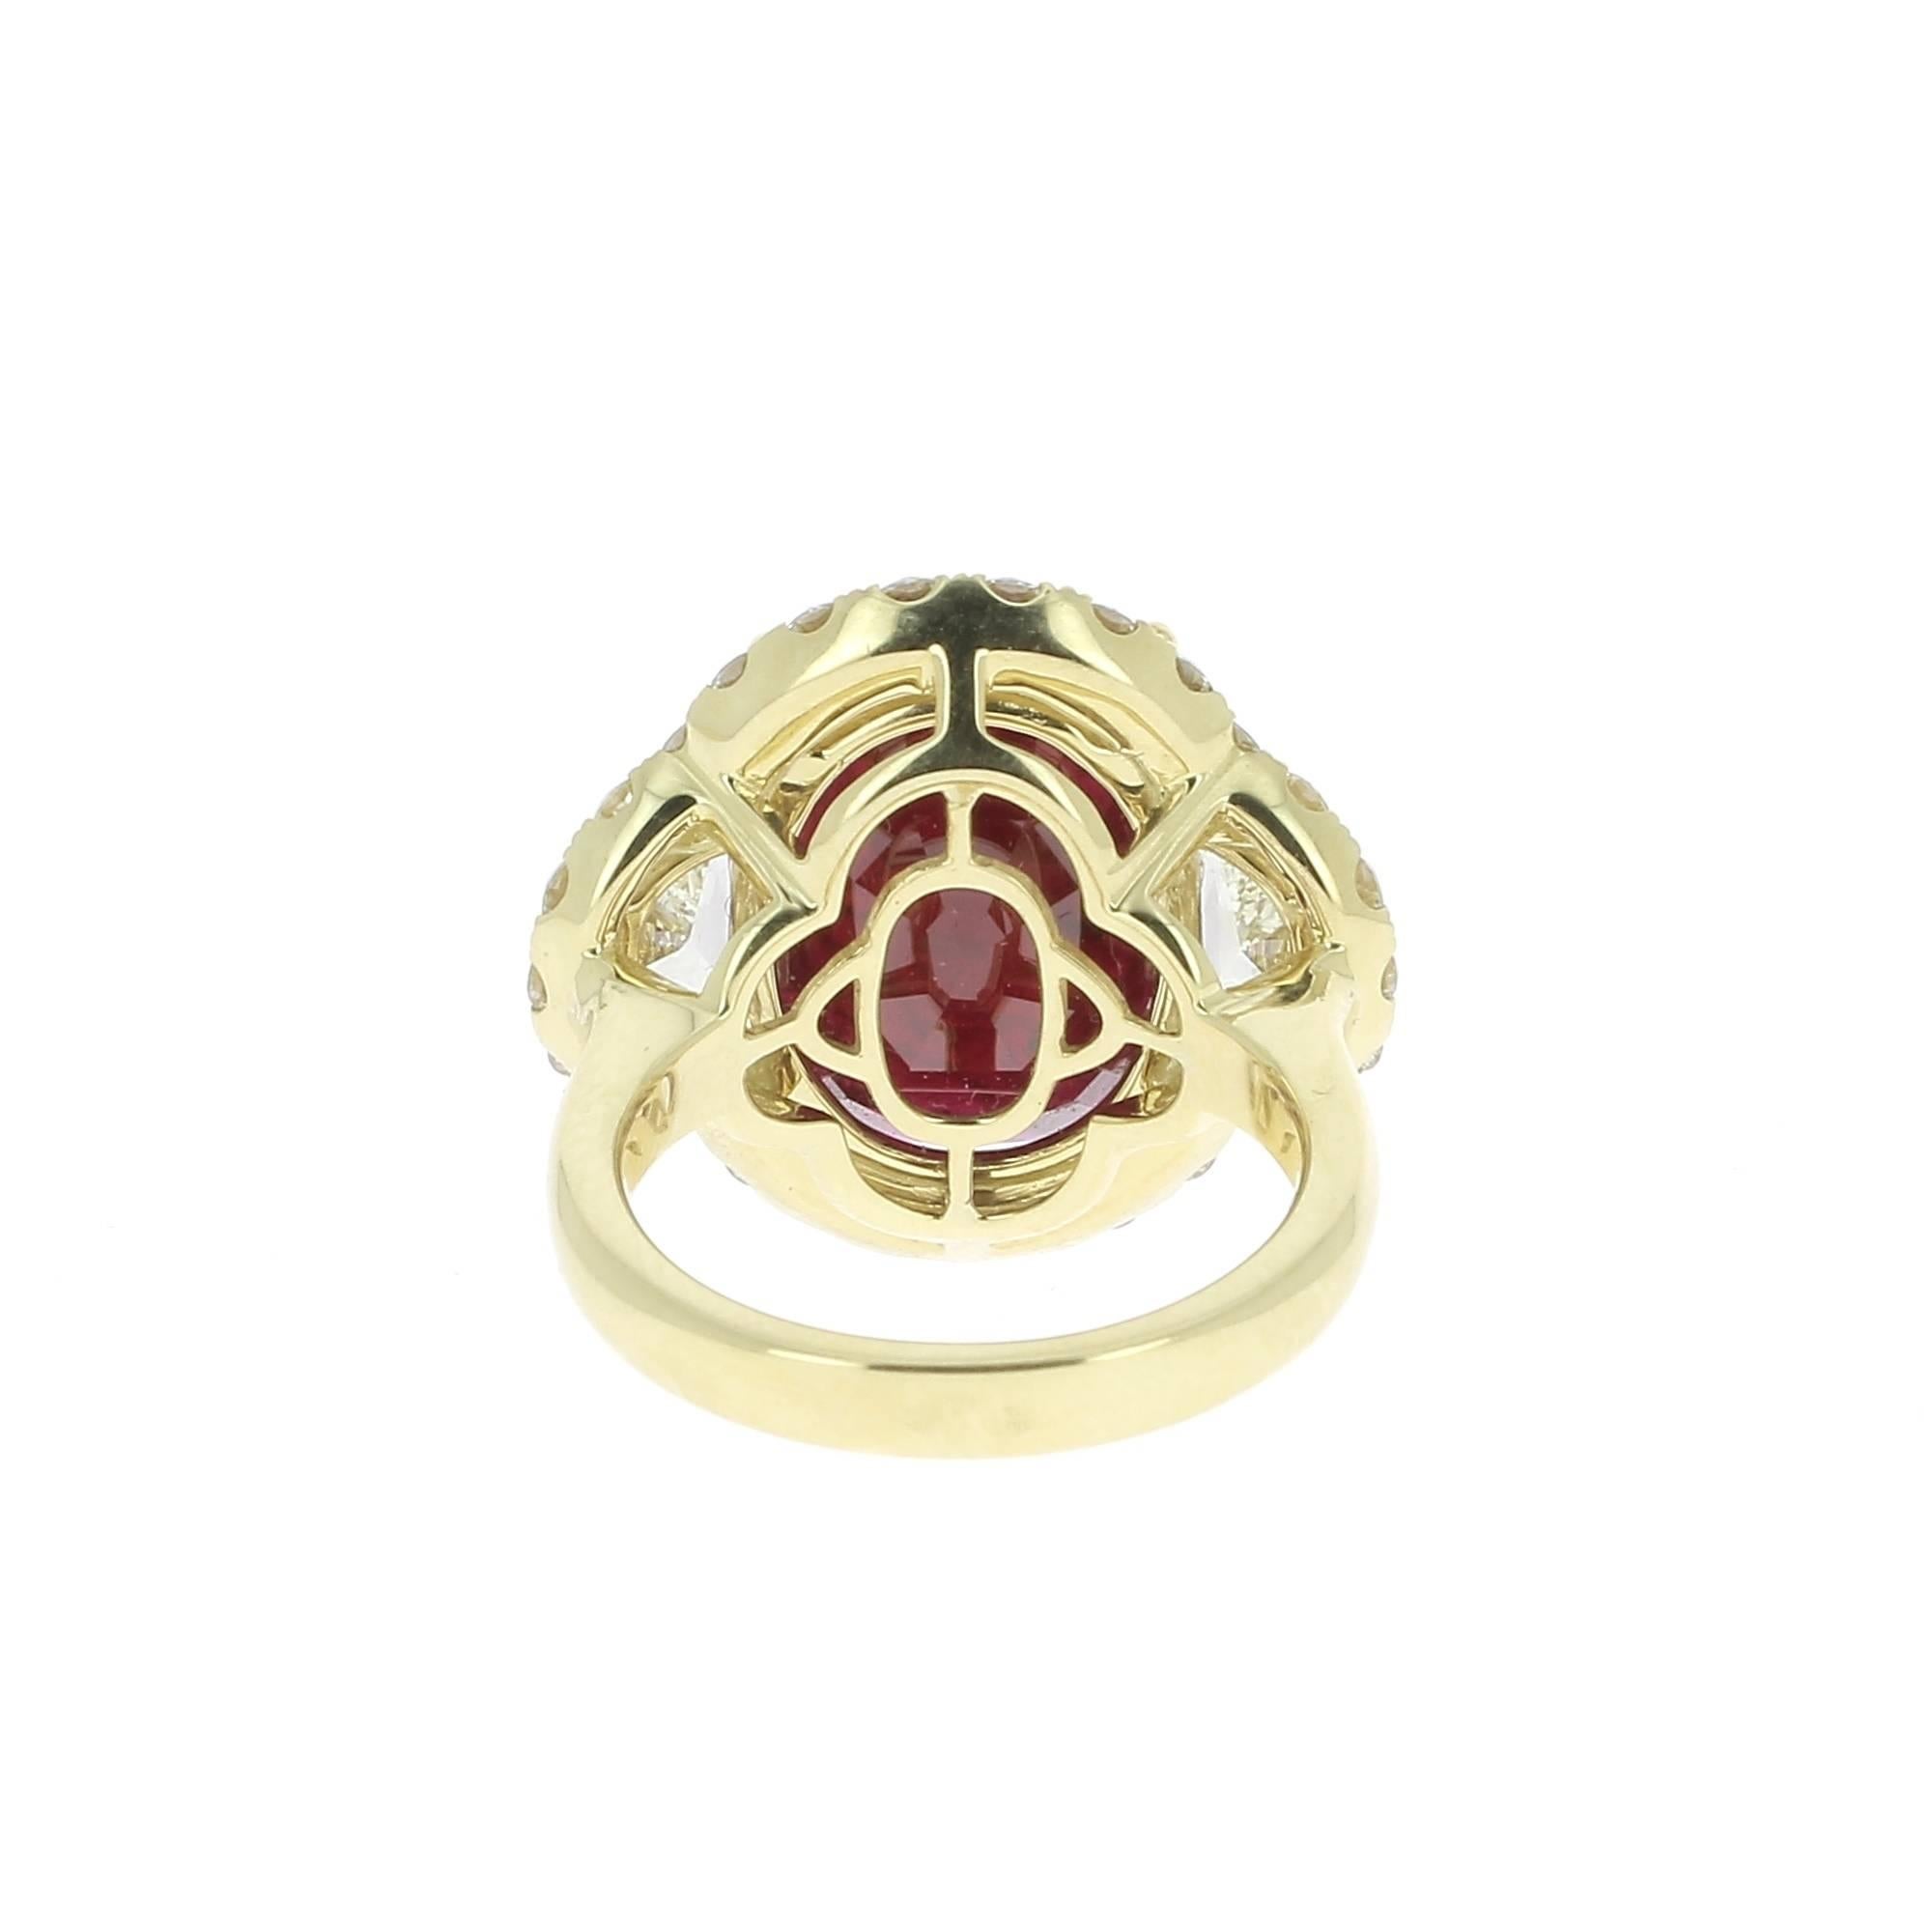 Stunning 18K Yellow Gold ring set in the center with a large Ruby weighing 12,52 carat(s) flanked by 2 half moon diamonds weighing 1,22 carat(s), surround with 26 Round Diamonds weighing 1,28 carat(s).
This Oval ruby comes with a GRS certificate